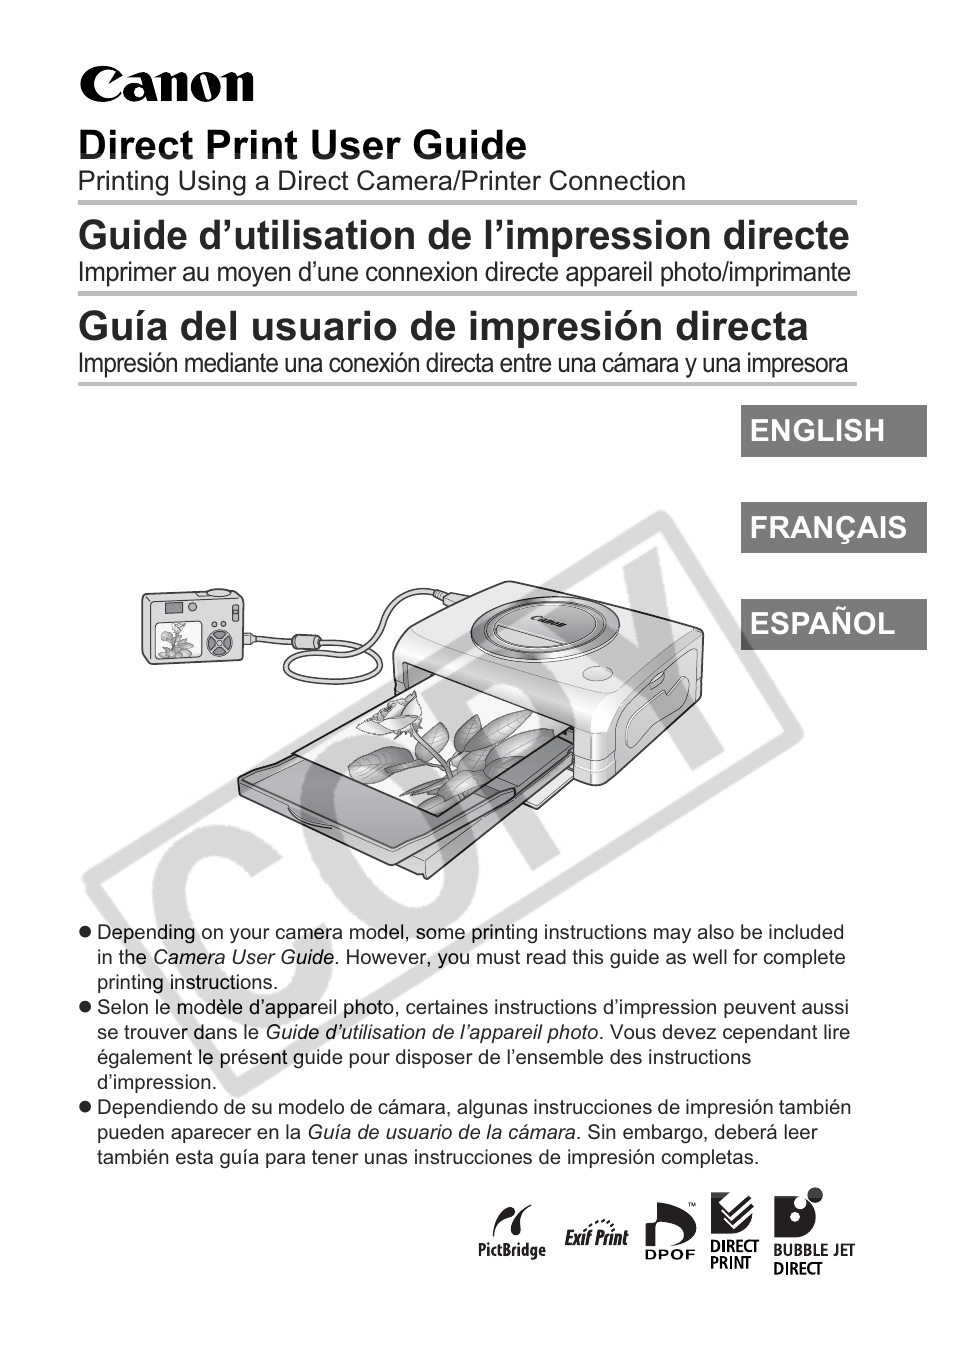 Canon Printing Using a Direct Camera/Printer Connection Guide Direct Print User Manual | 76 pages